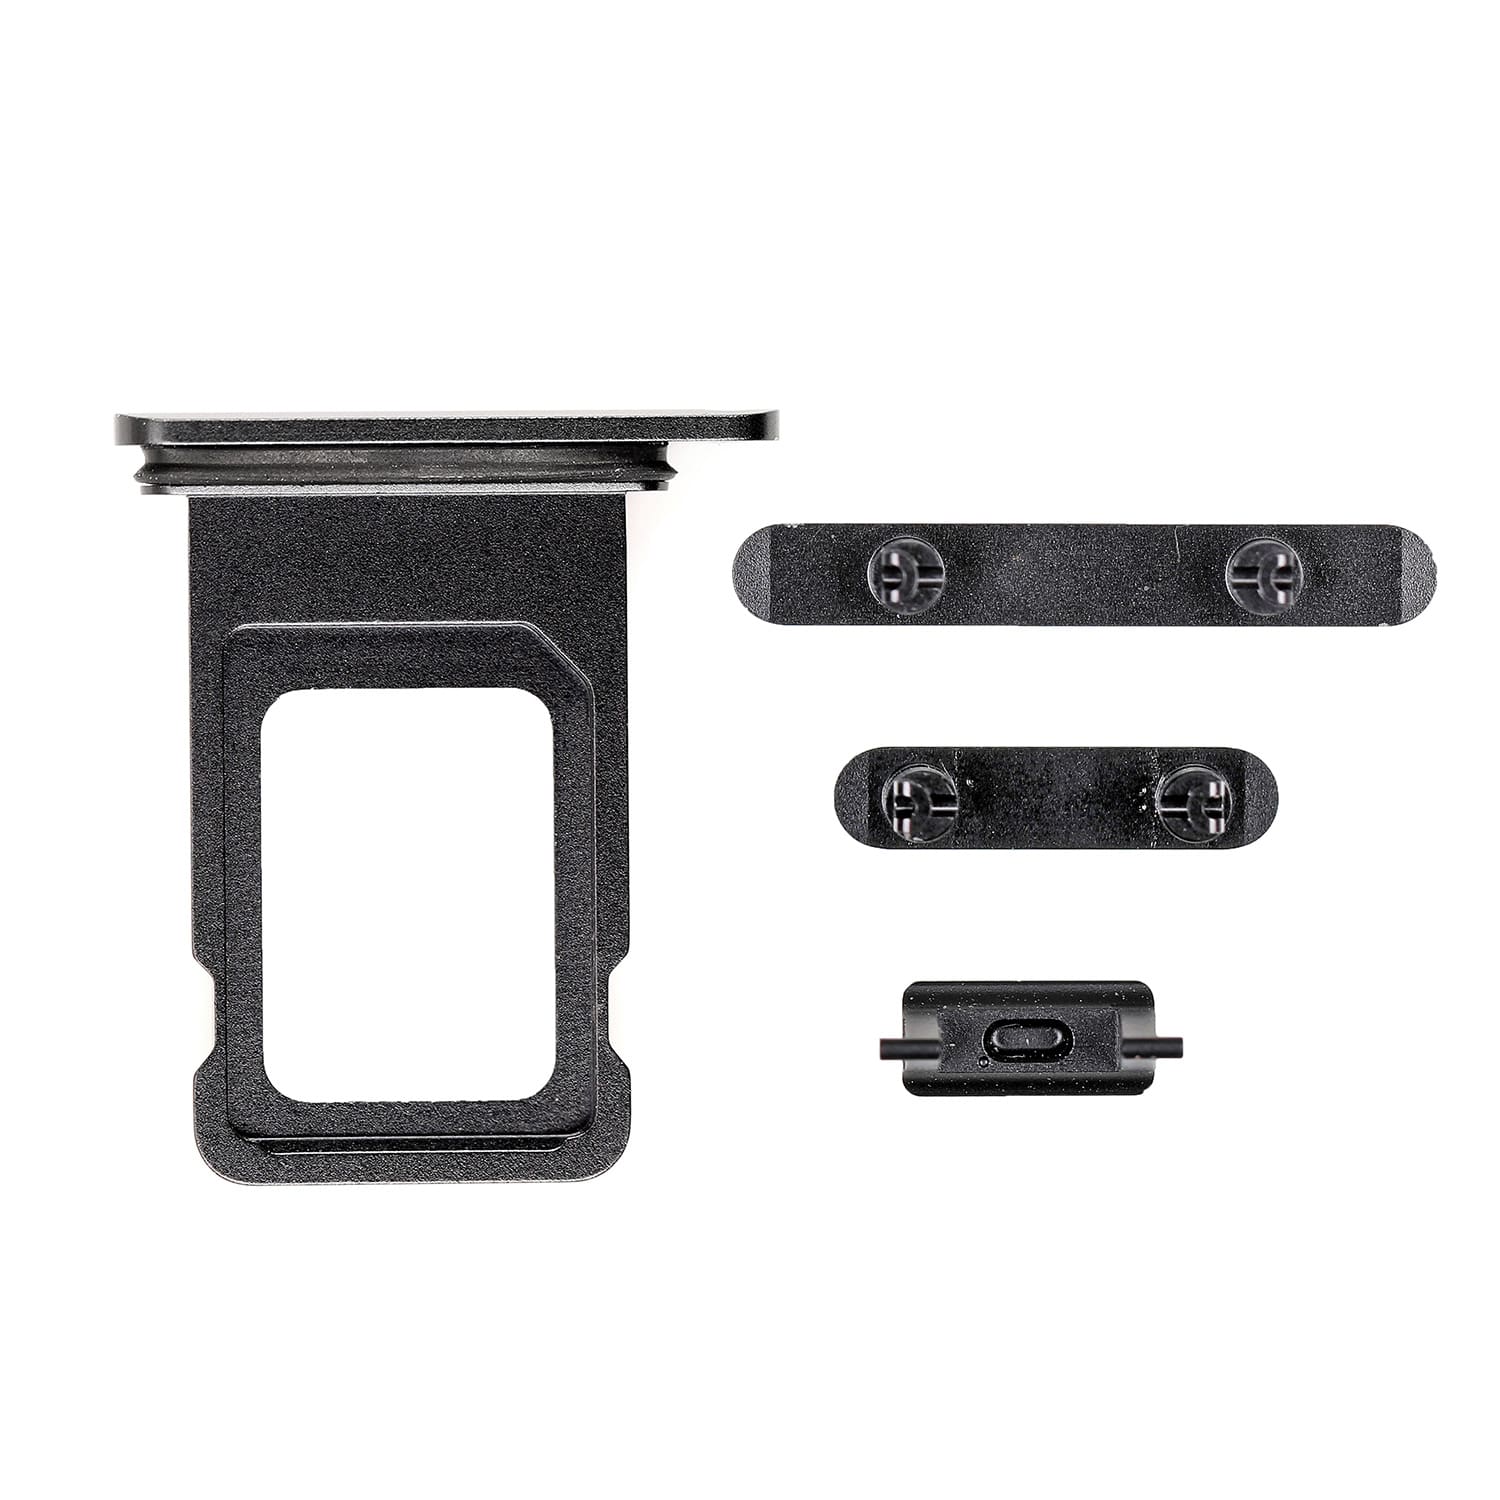 SPACE GRAY SIDE BUTTONS SET WITH SINGLE SIM CARD TRAY FOR IPHONE XR